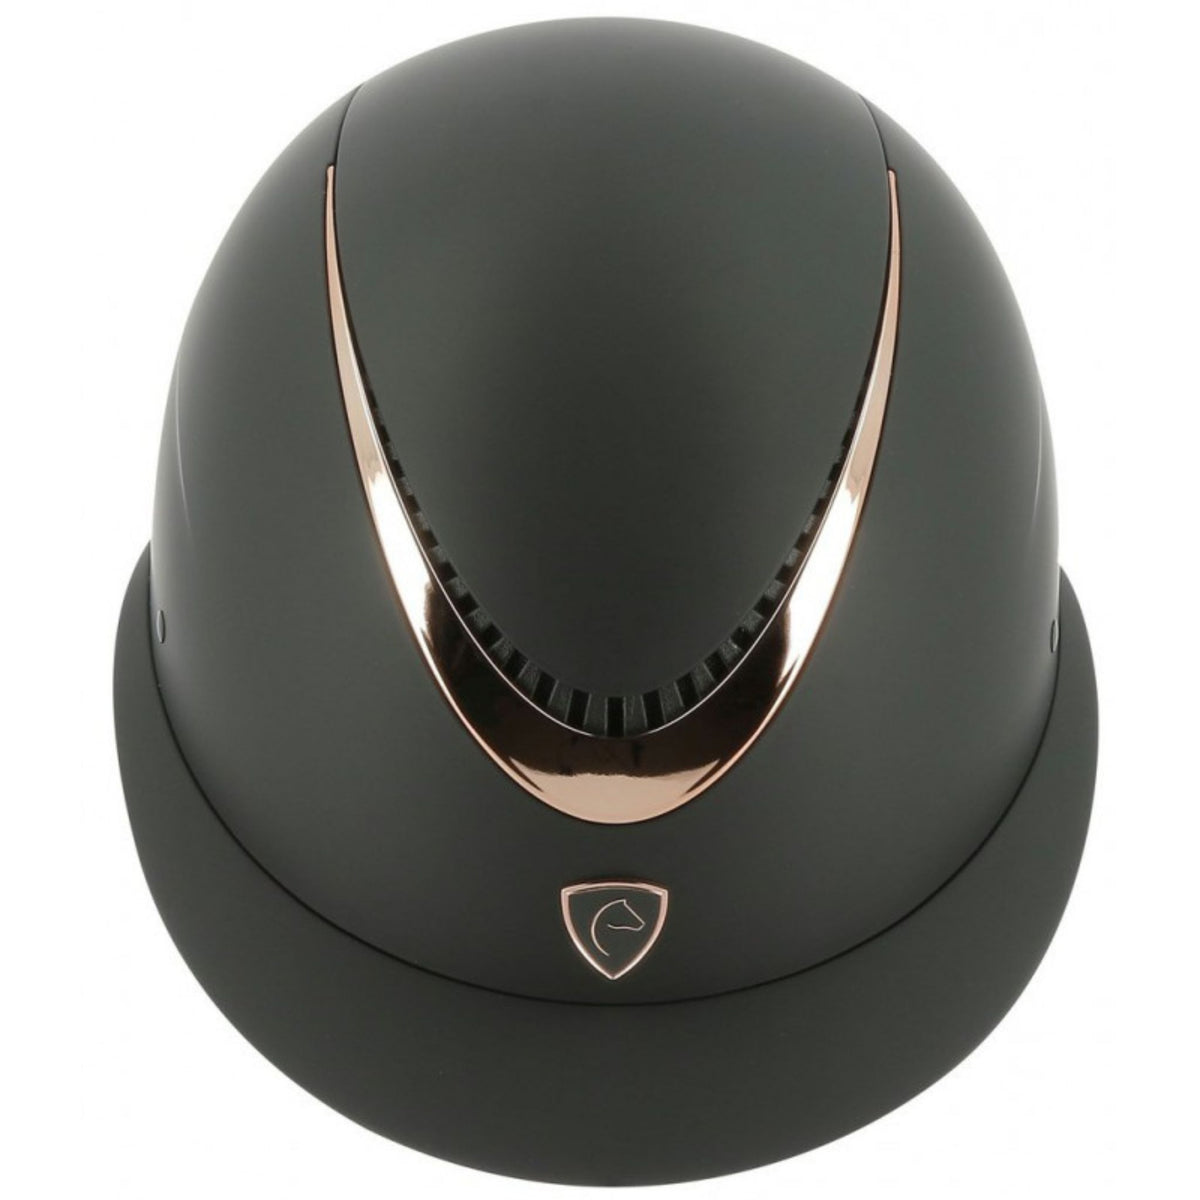 wide brimmed black helmet with rose gold accents 